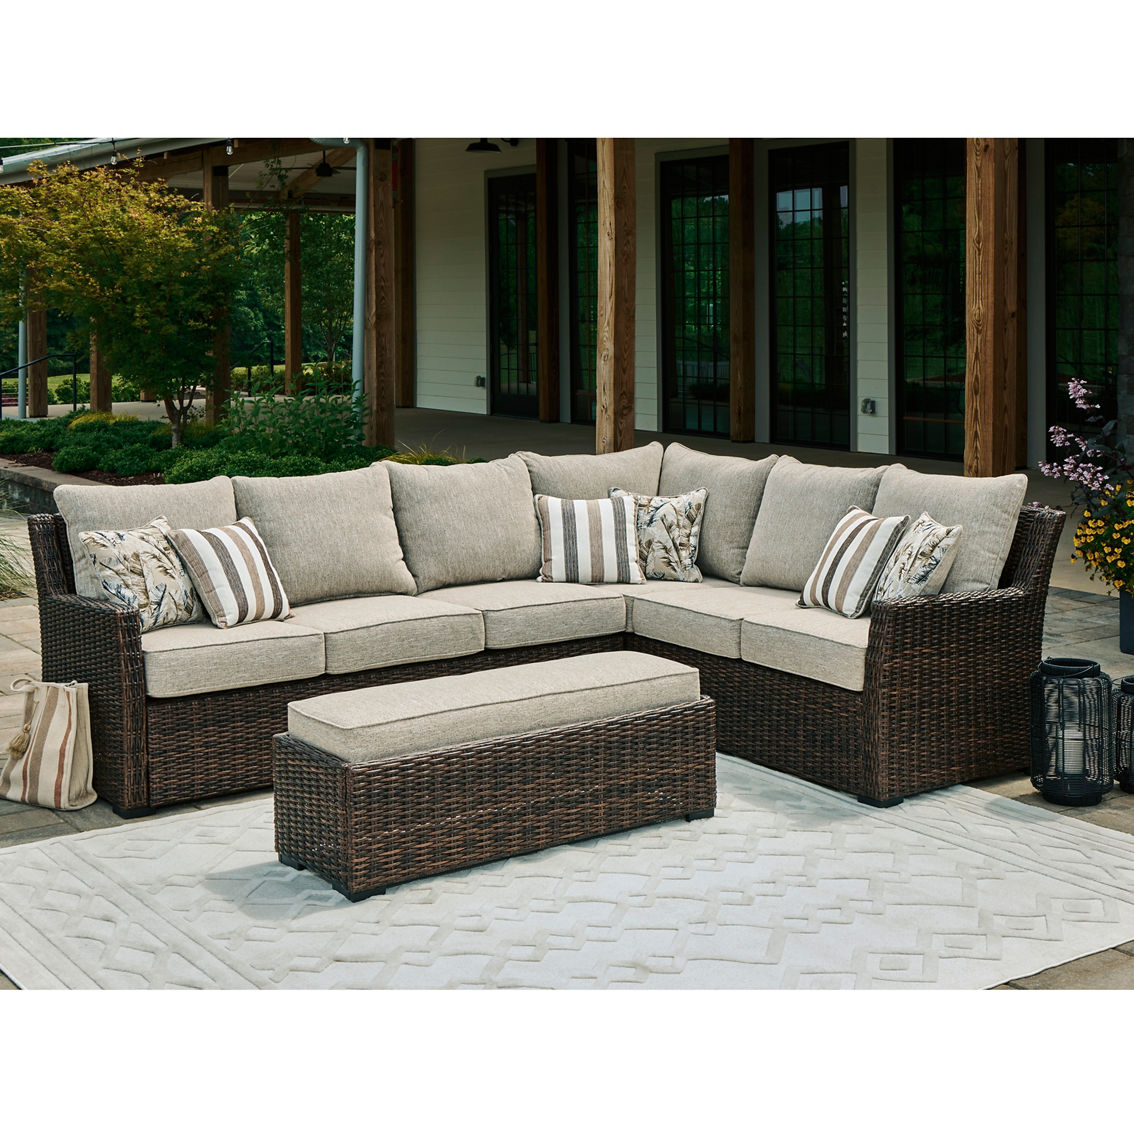 Signature Design by Ashley Brook Ranch 2 pc. Outdoor Set: Sofa Sectional, Table - Image 2 of 3